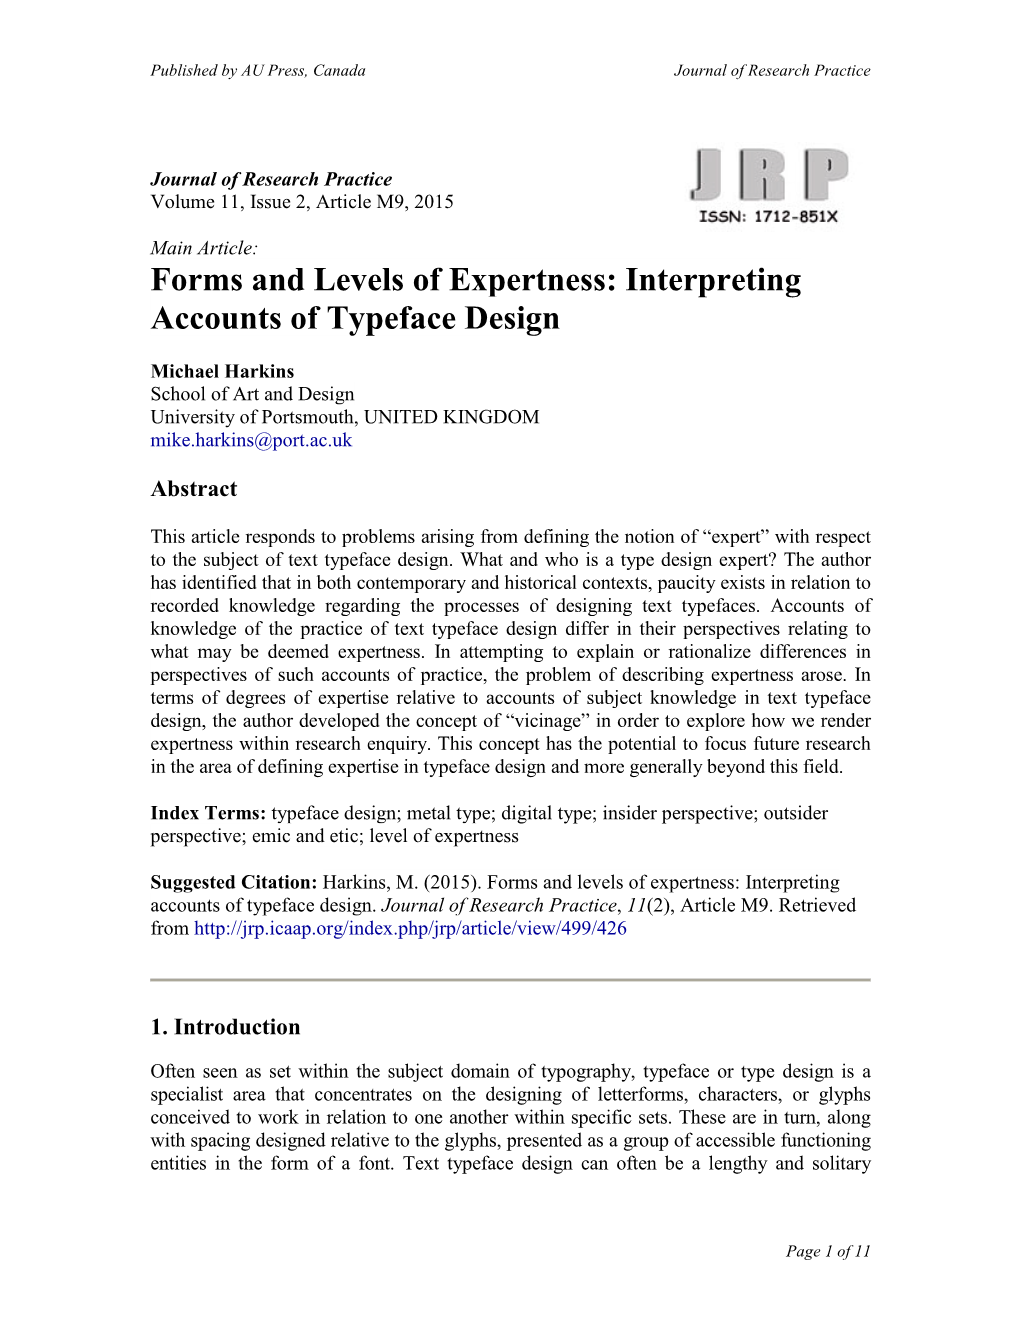 Forms and Levels of Expertness: Interpreting Accounts of Typeface Design